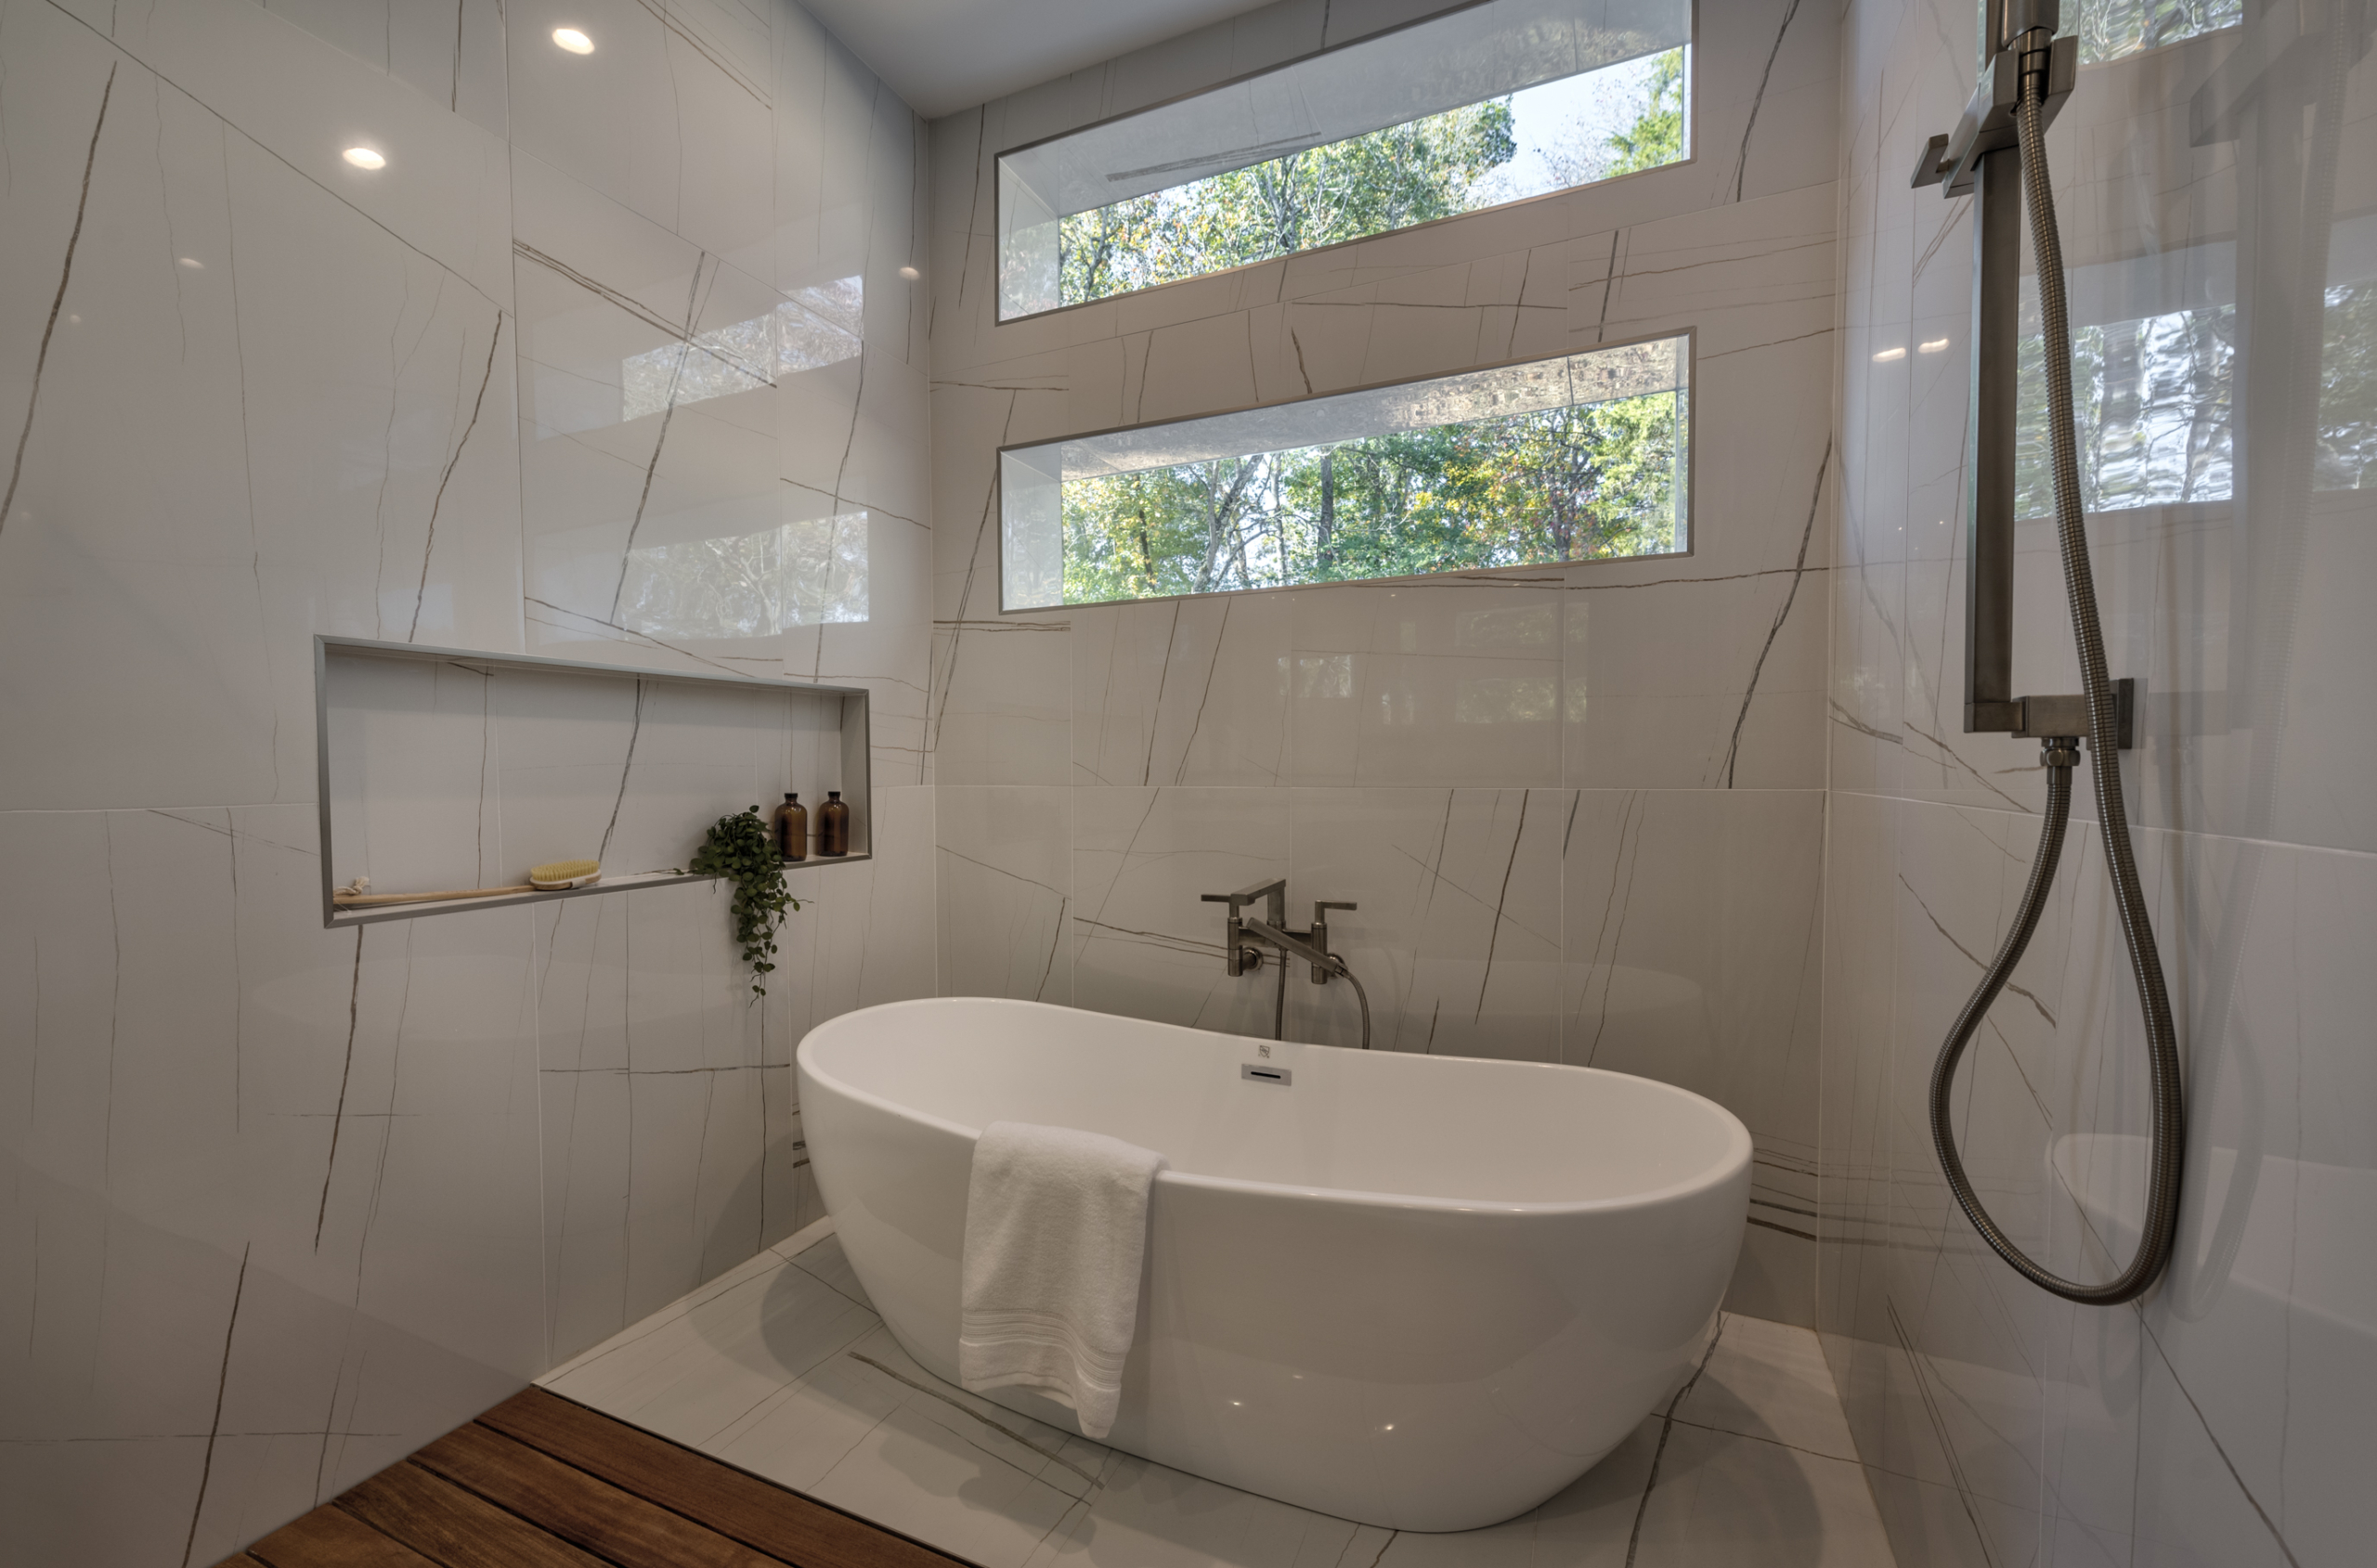 Modern Resort-style primary bath with freestanding tub and windows